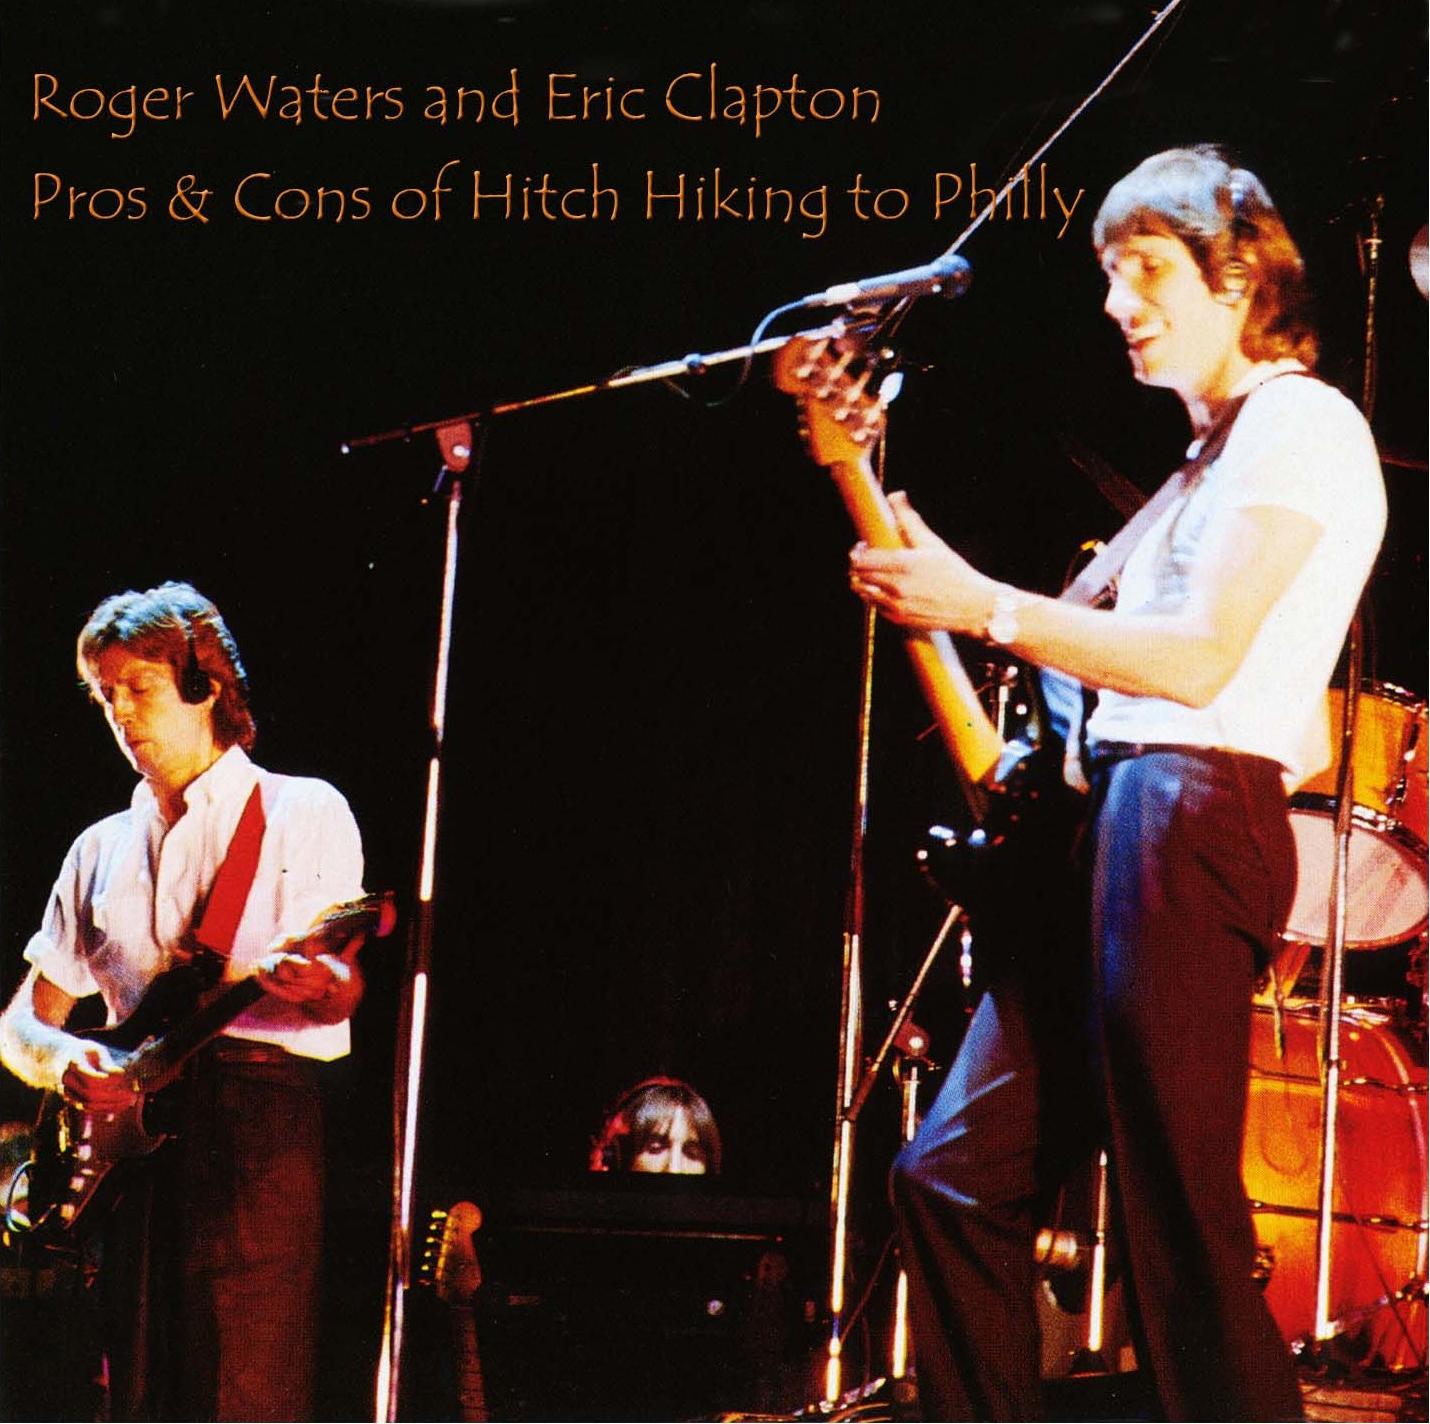 Roger Waters with Eric Clapton - The Pros and Cons of Hitch Hiking 